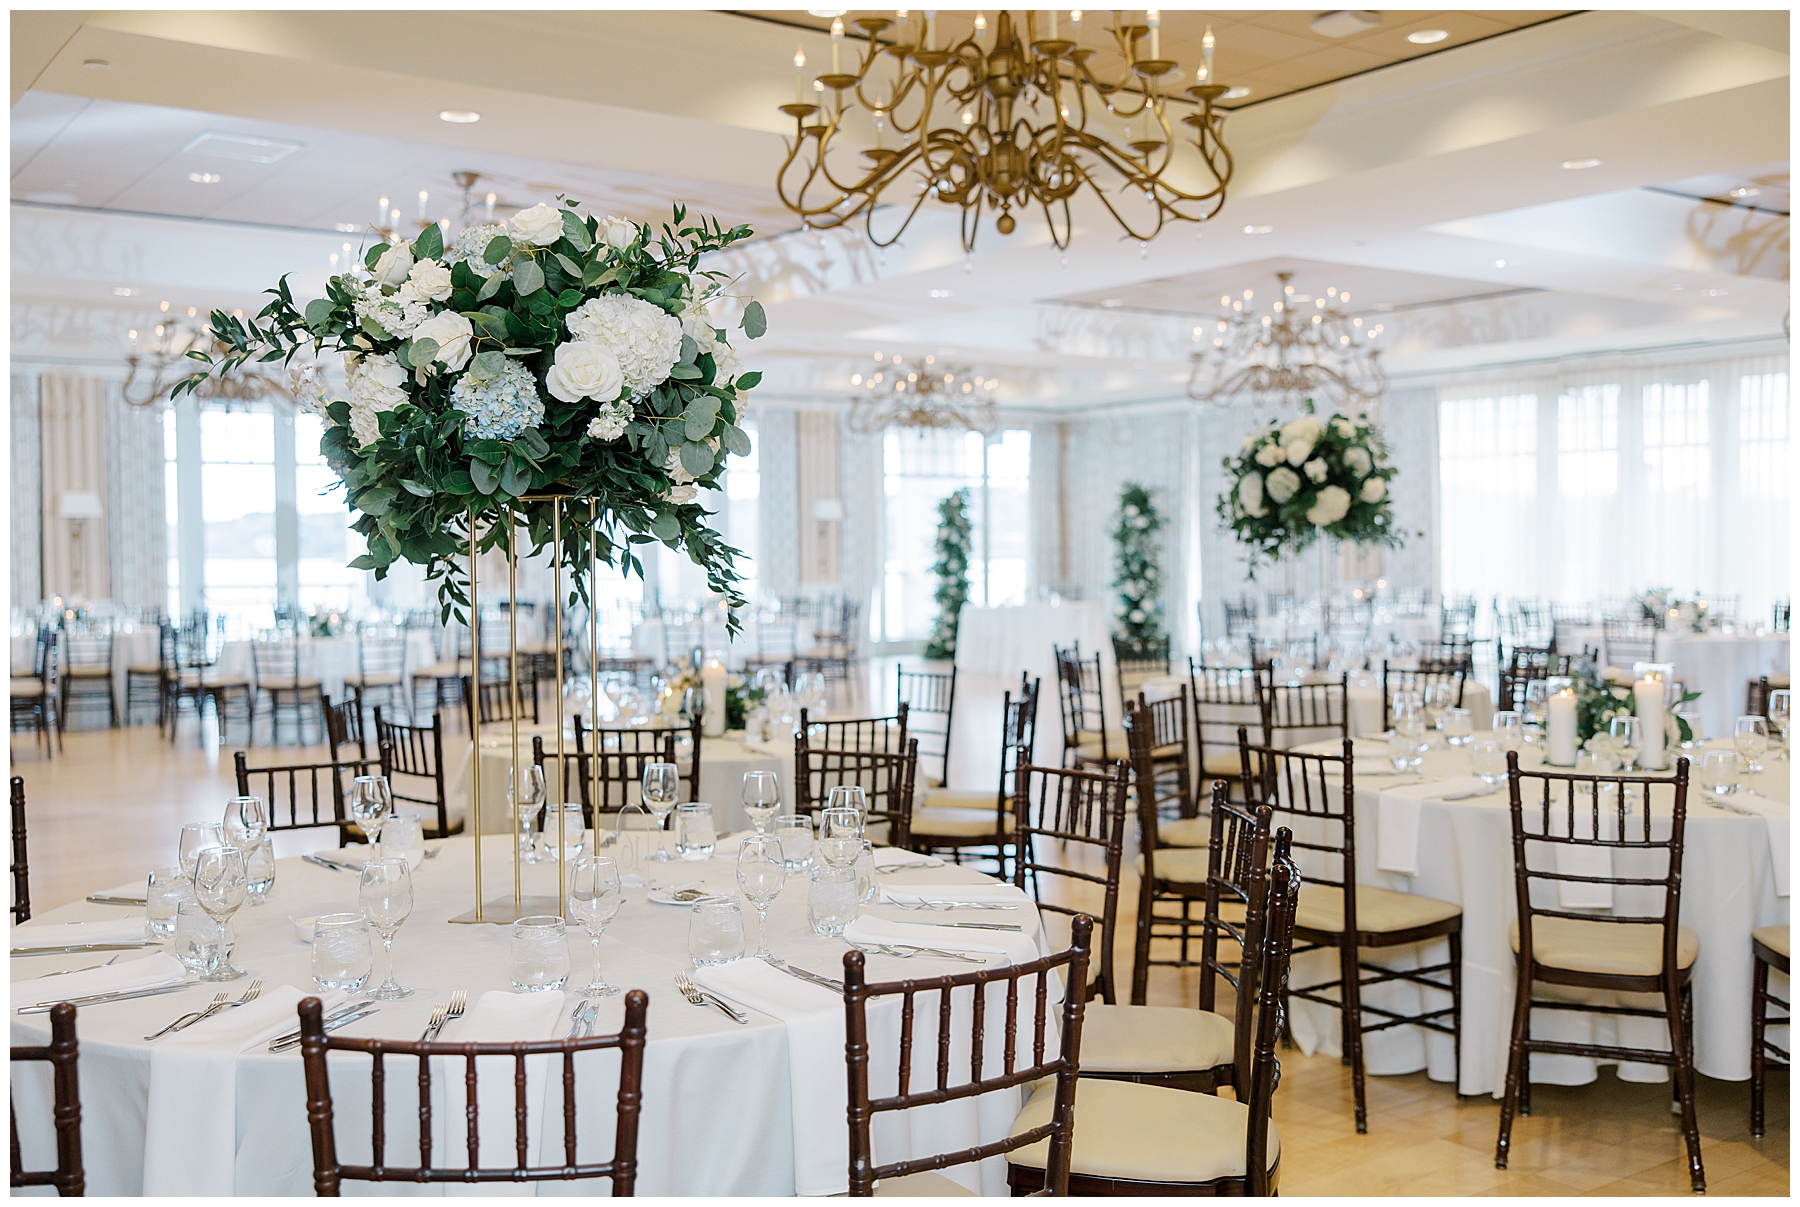 elegant wedding details from Wedding reception at Beauport Hotel in Gloucester, MA